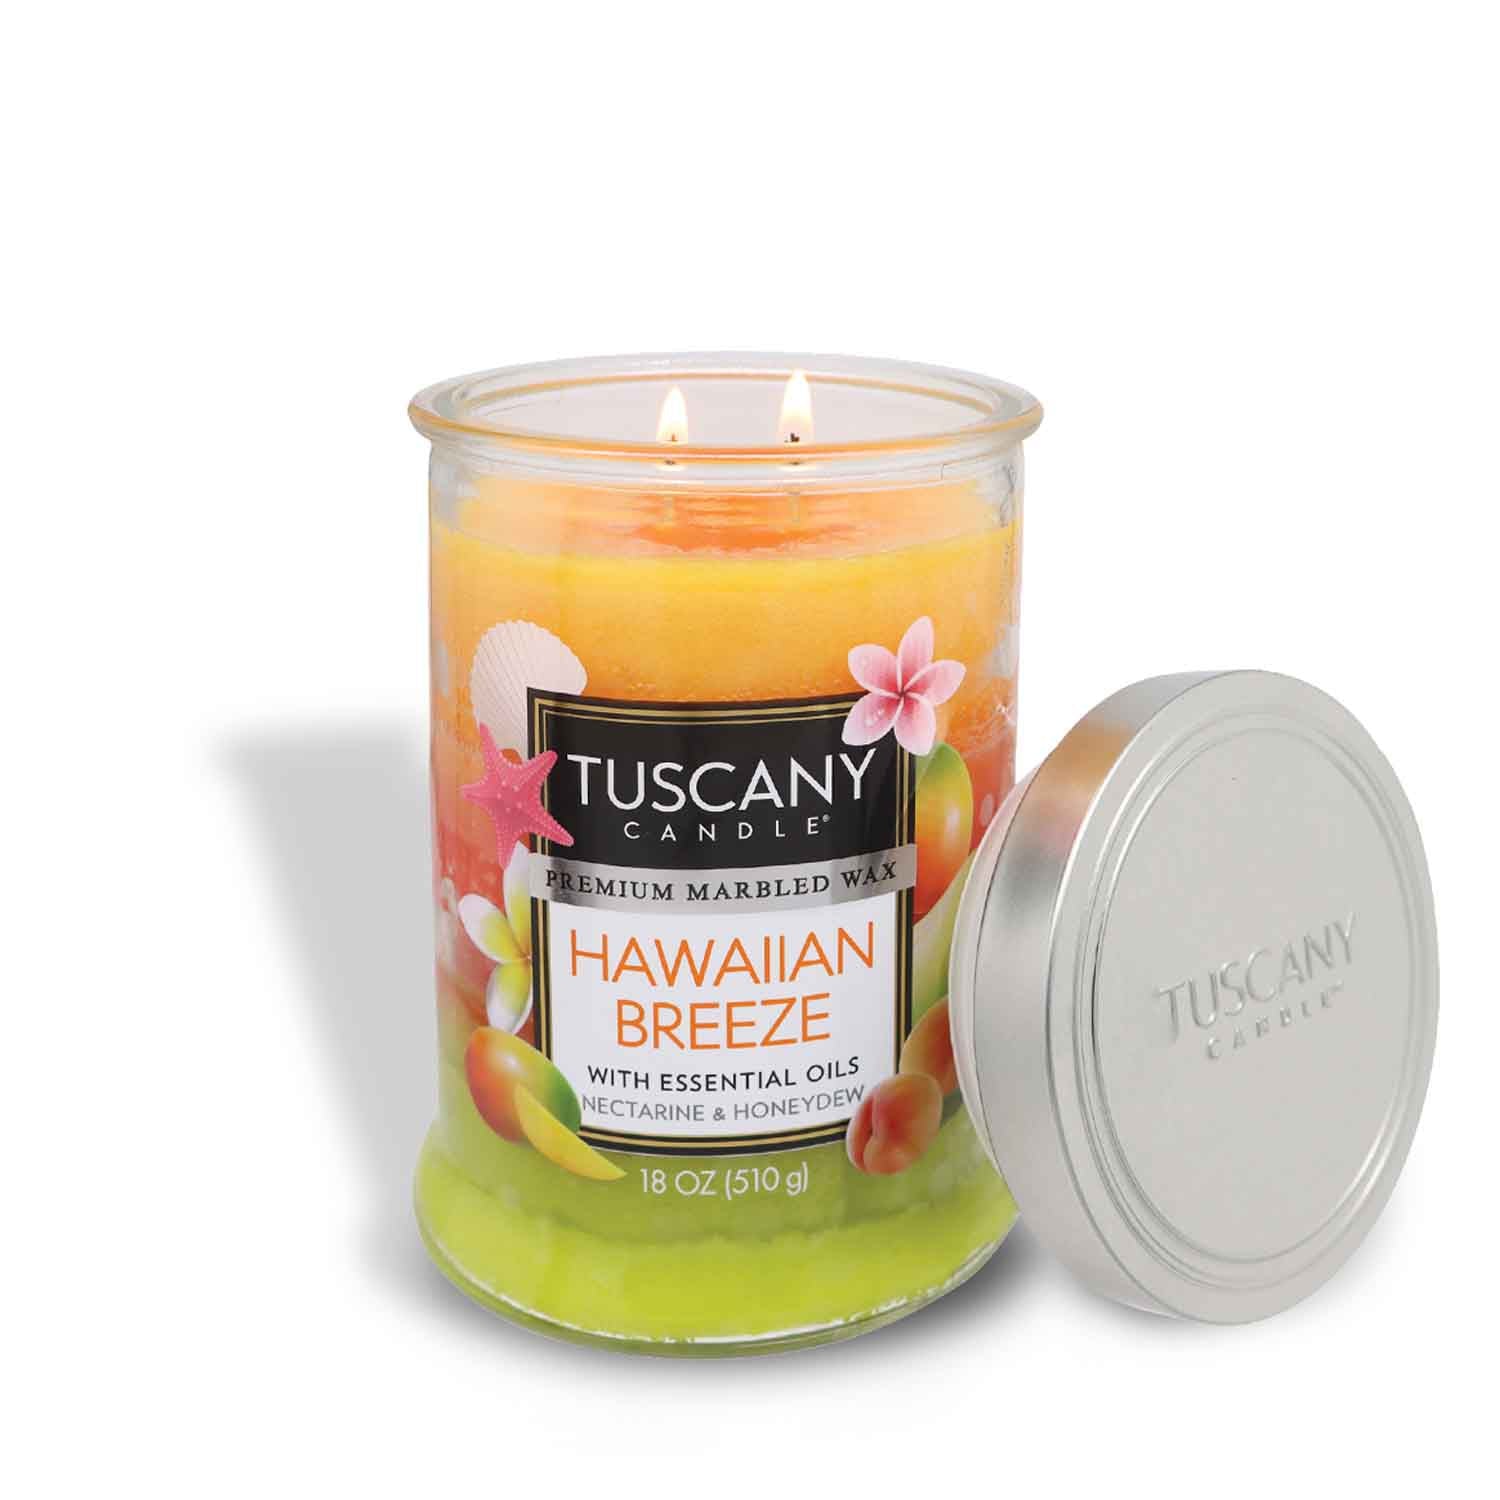 Tuscany Candle's Hawaiian Breeze Long-Lasting Scented Jar Candle (18 oz) brings the essence of a tropical paradise to your home in Tuscany.